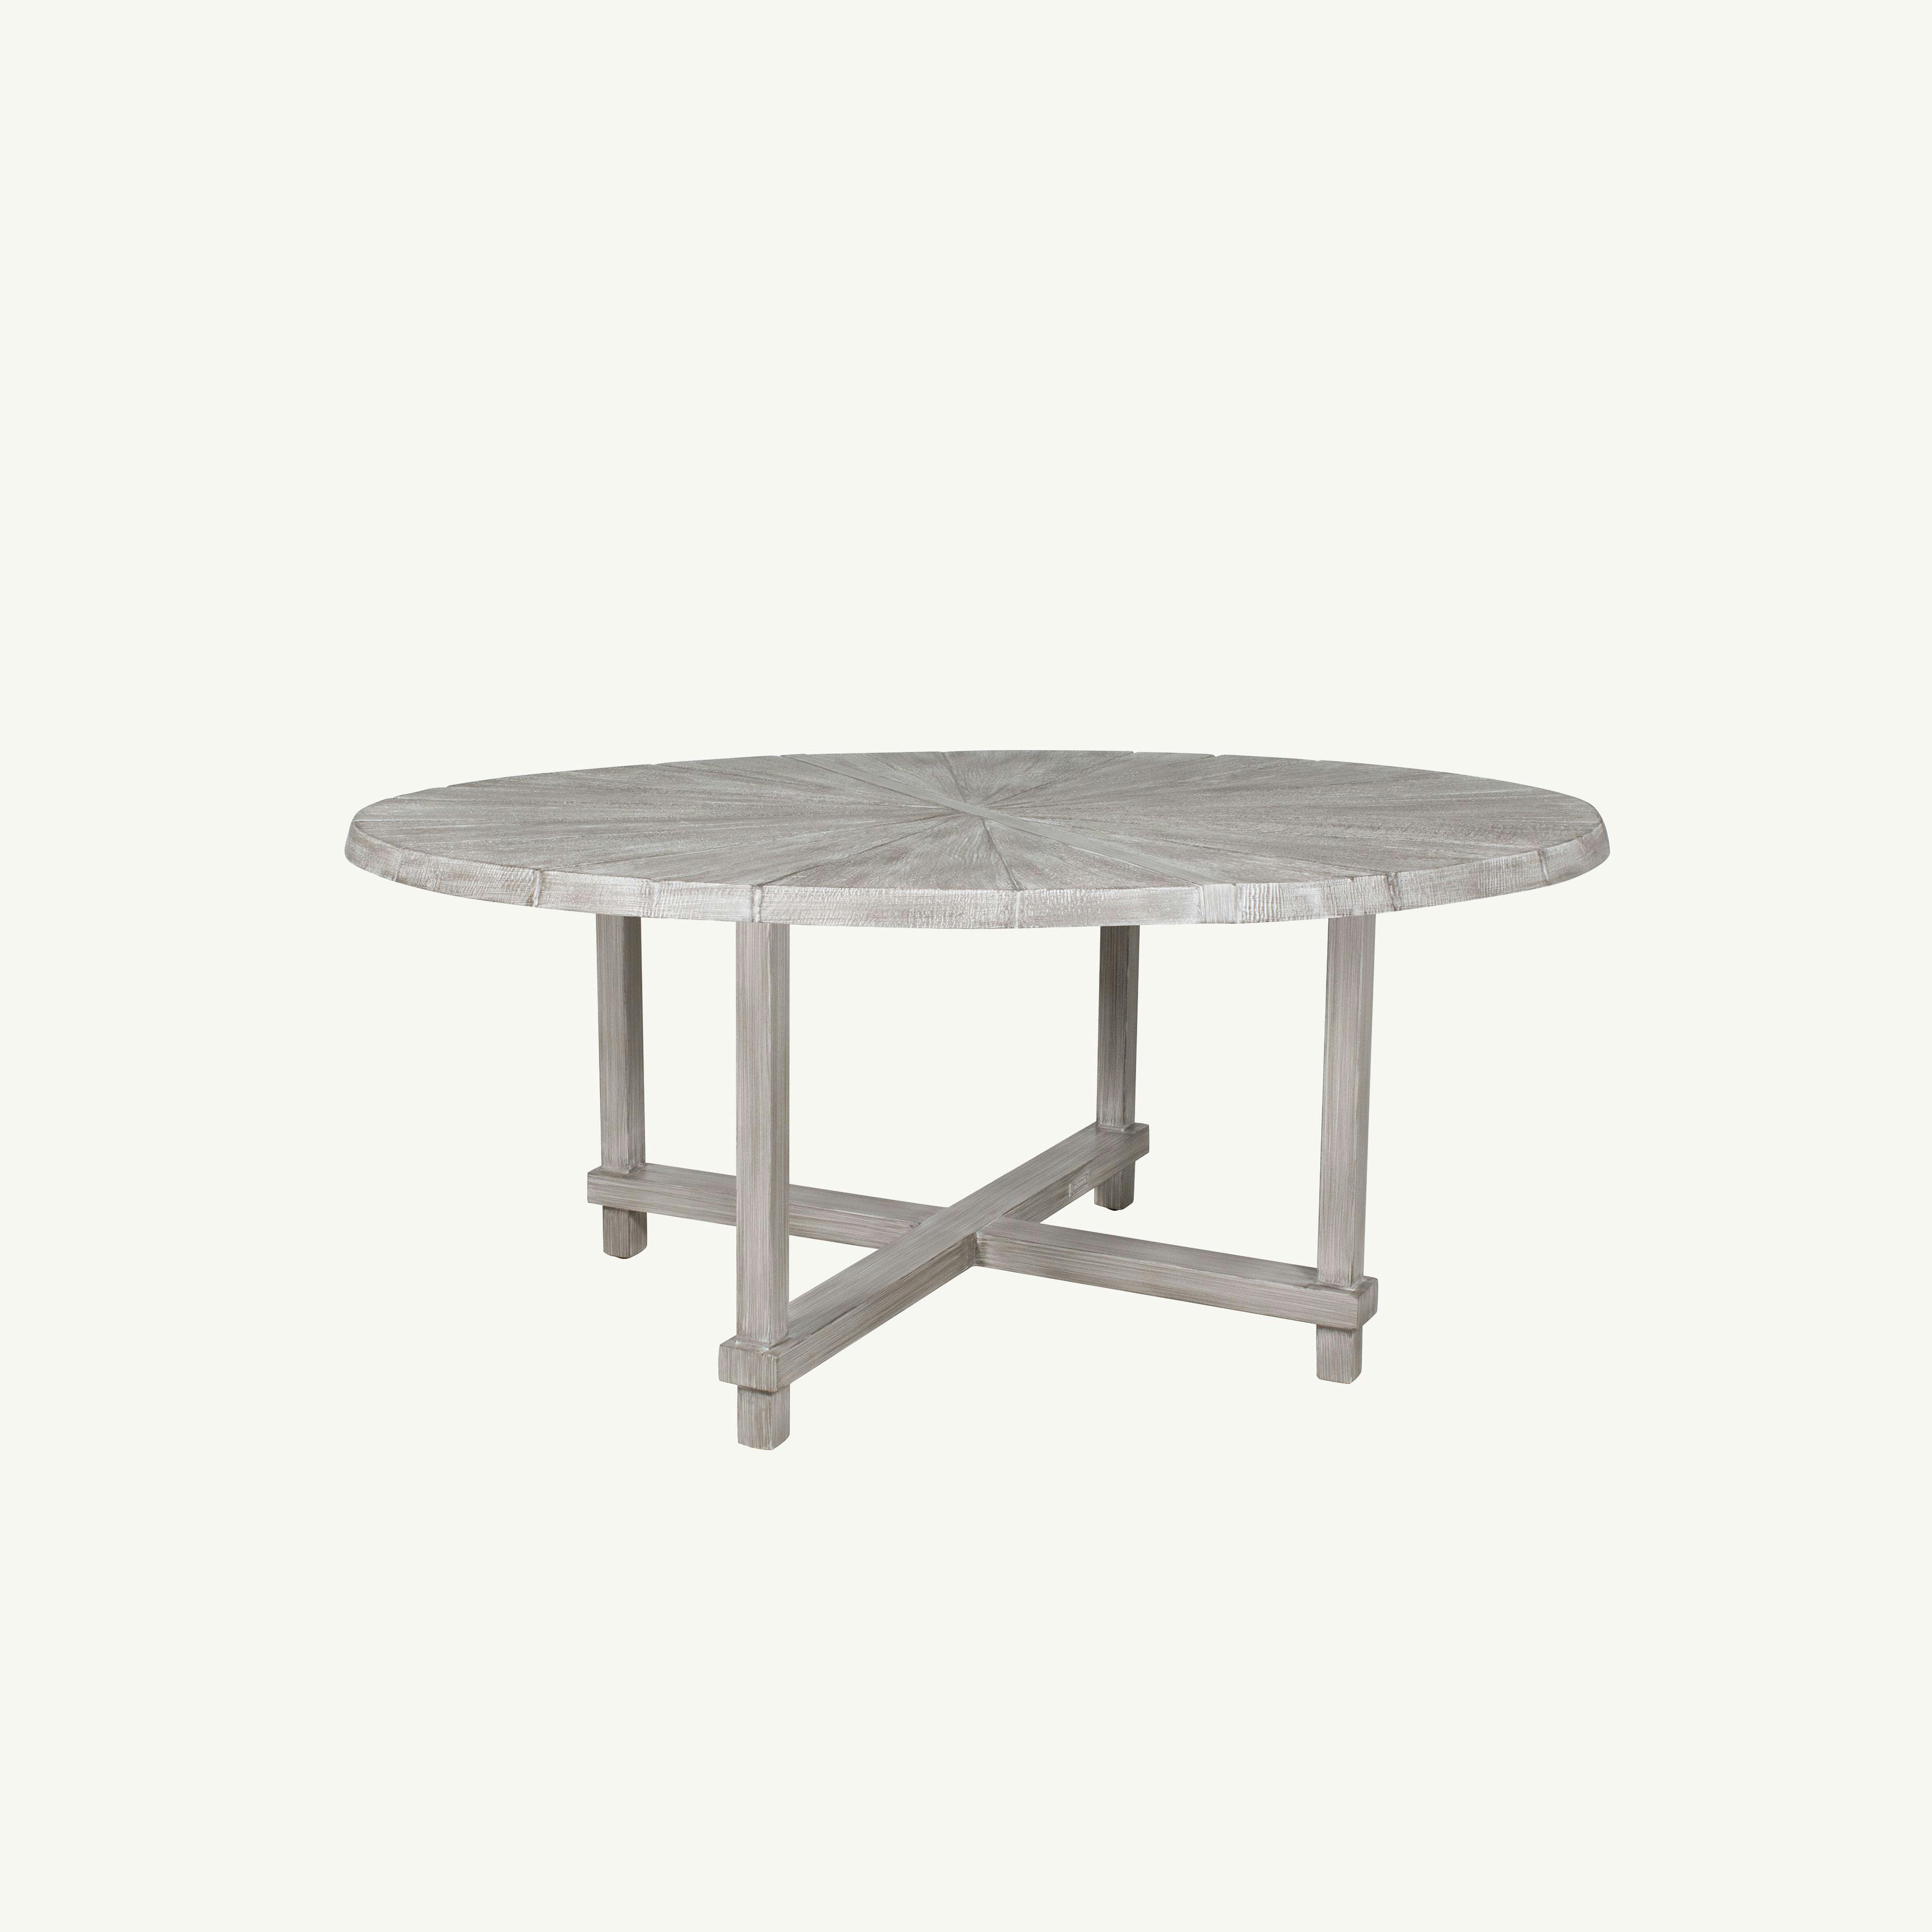 Antler Hill 60" Round Dining Table